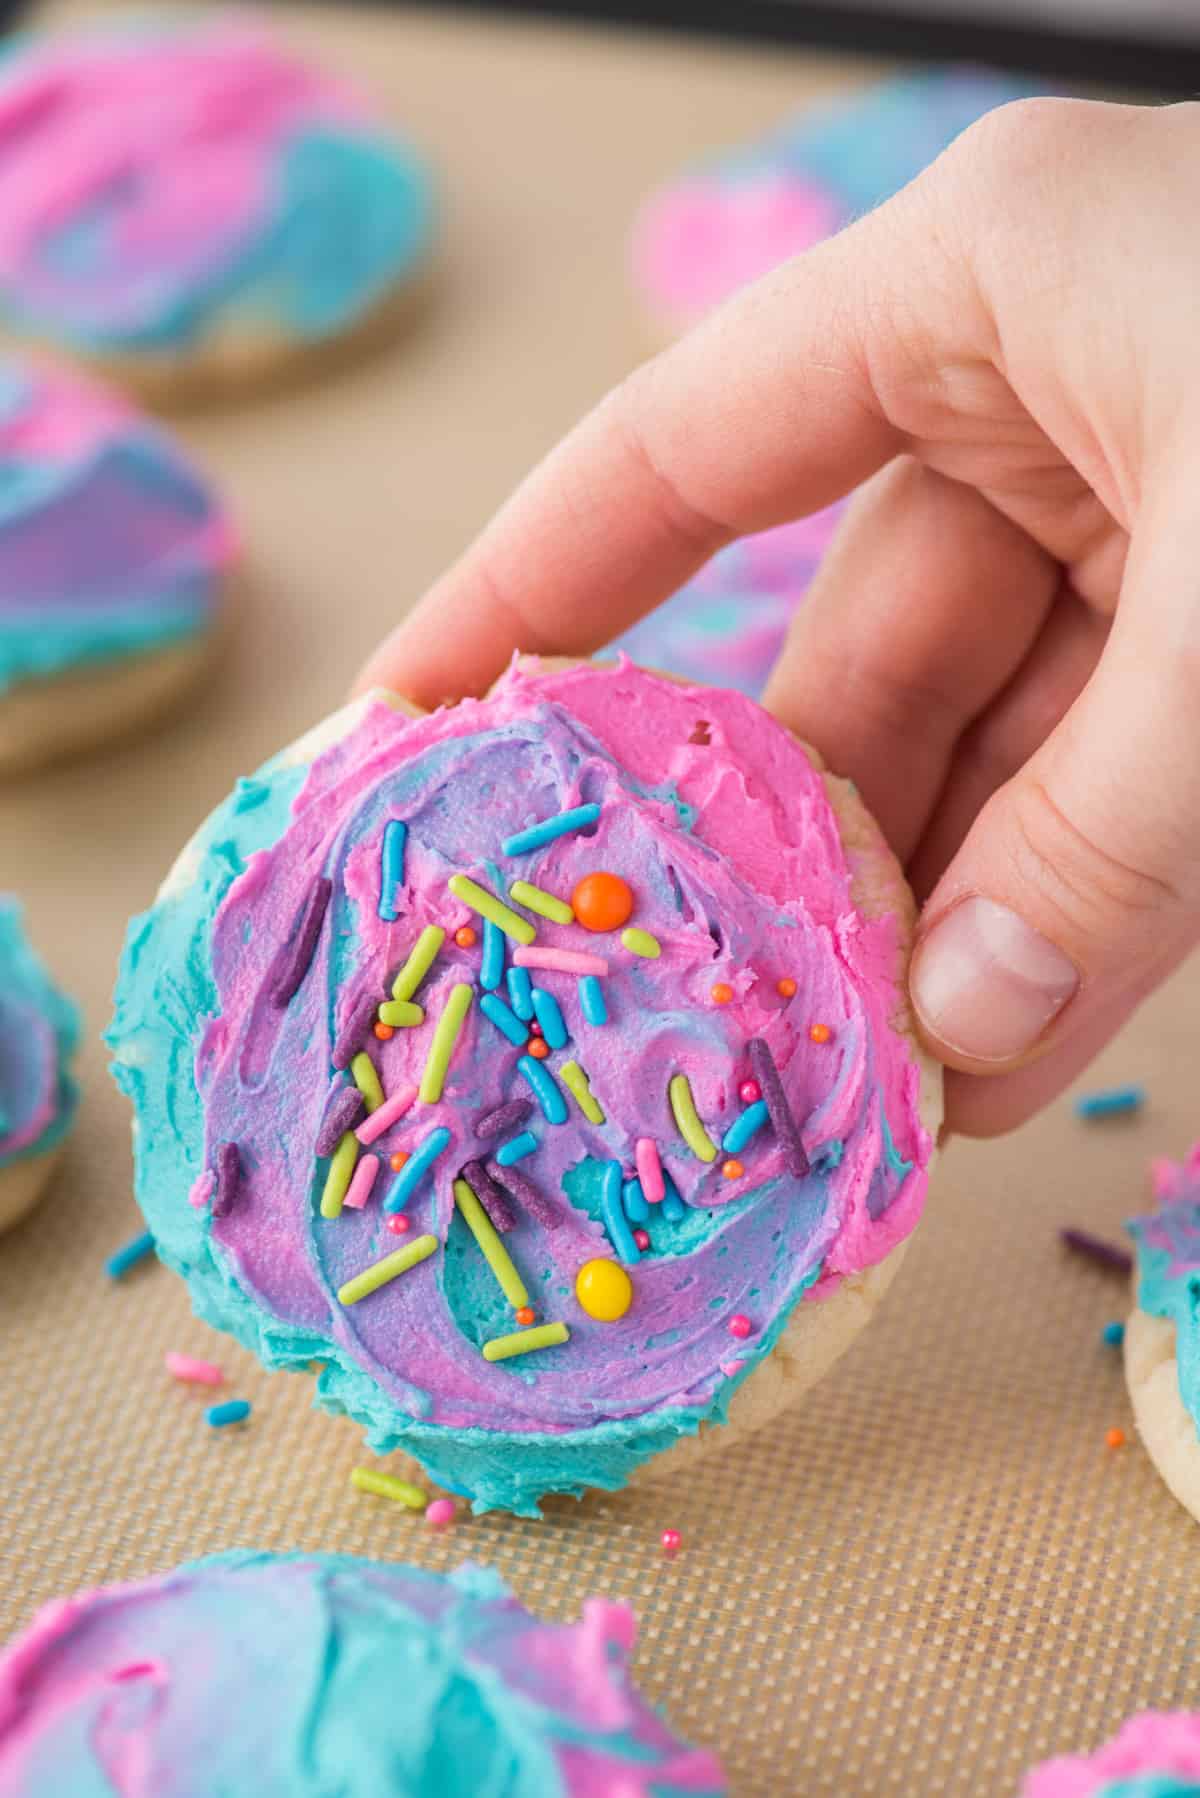 a sugar cookie decorated with a pink, purple and blue frosting and sprinkles being held up off a silicone mat with more cookies around